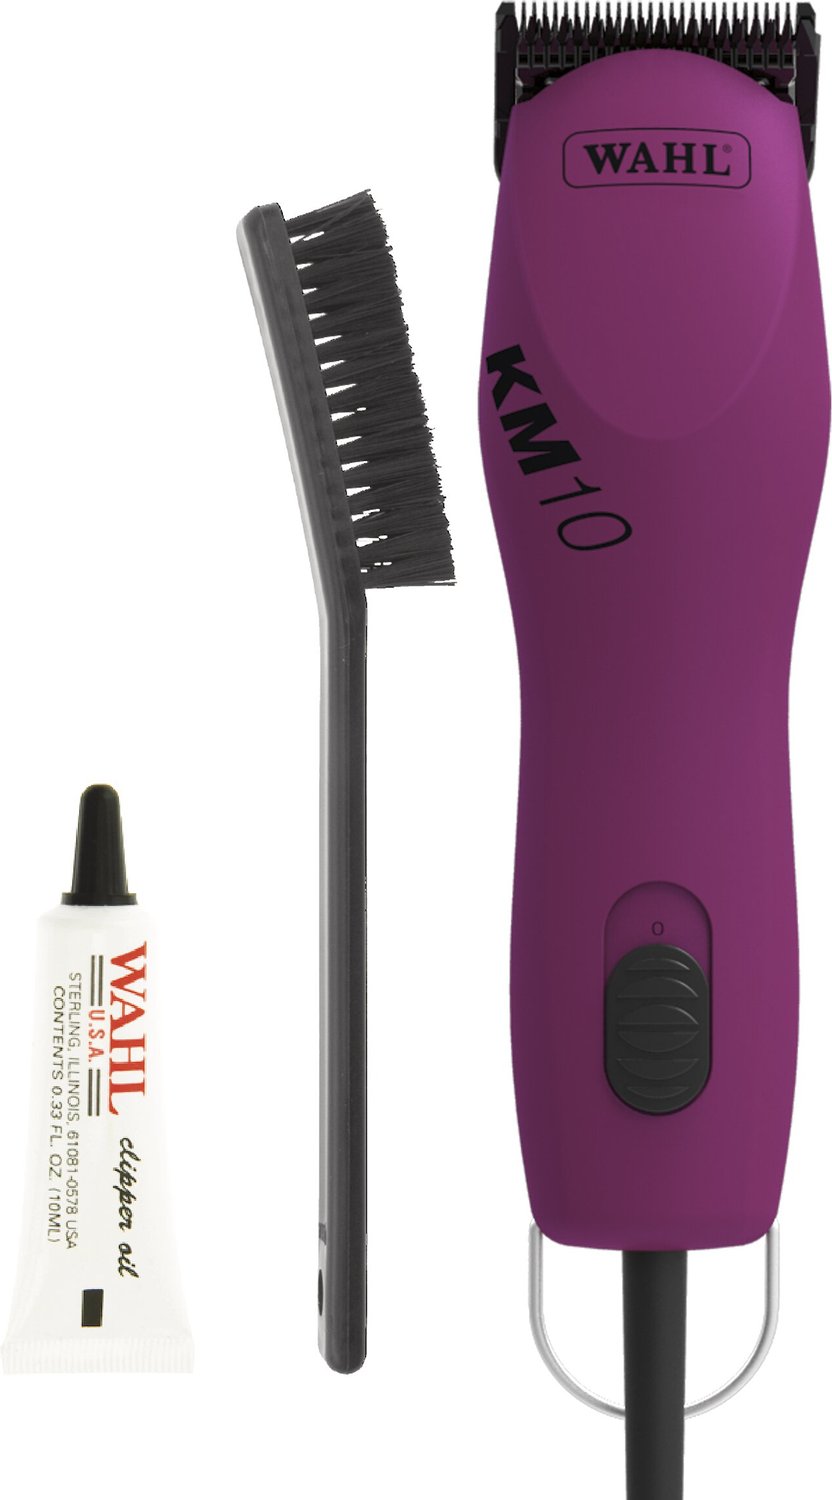 Wahl KM10 Brushless 2-Speed Professional Dog & Cat Clipper, Berry